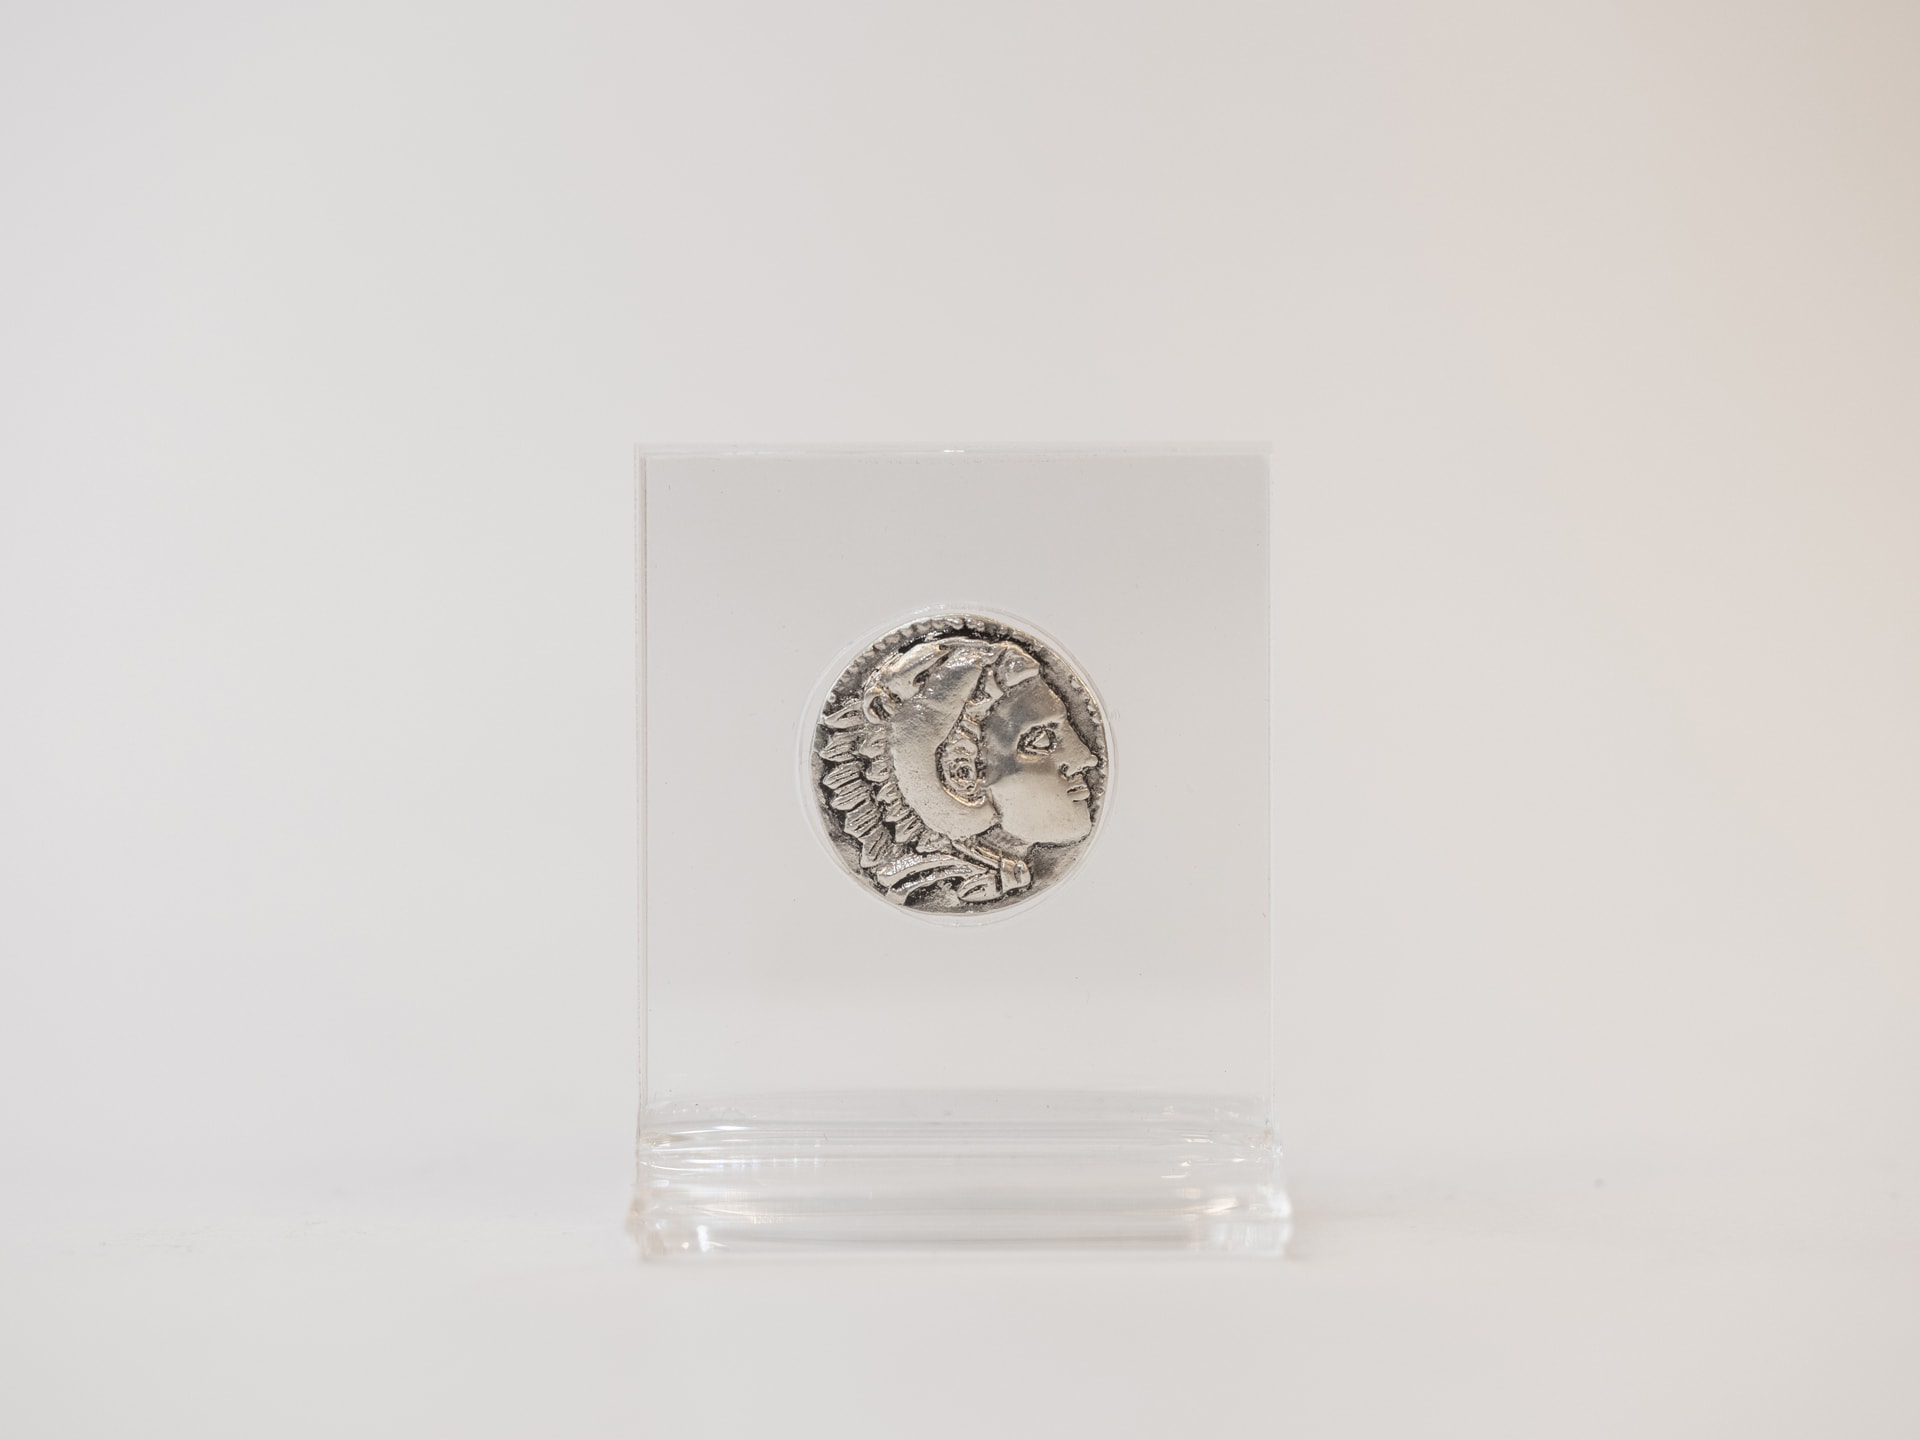 Alexander the Great Coin